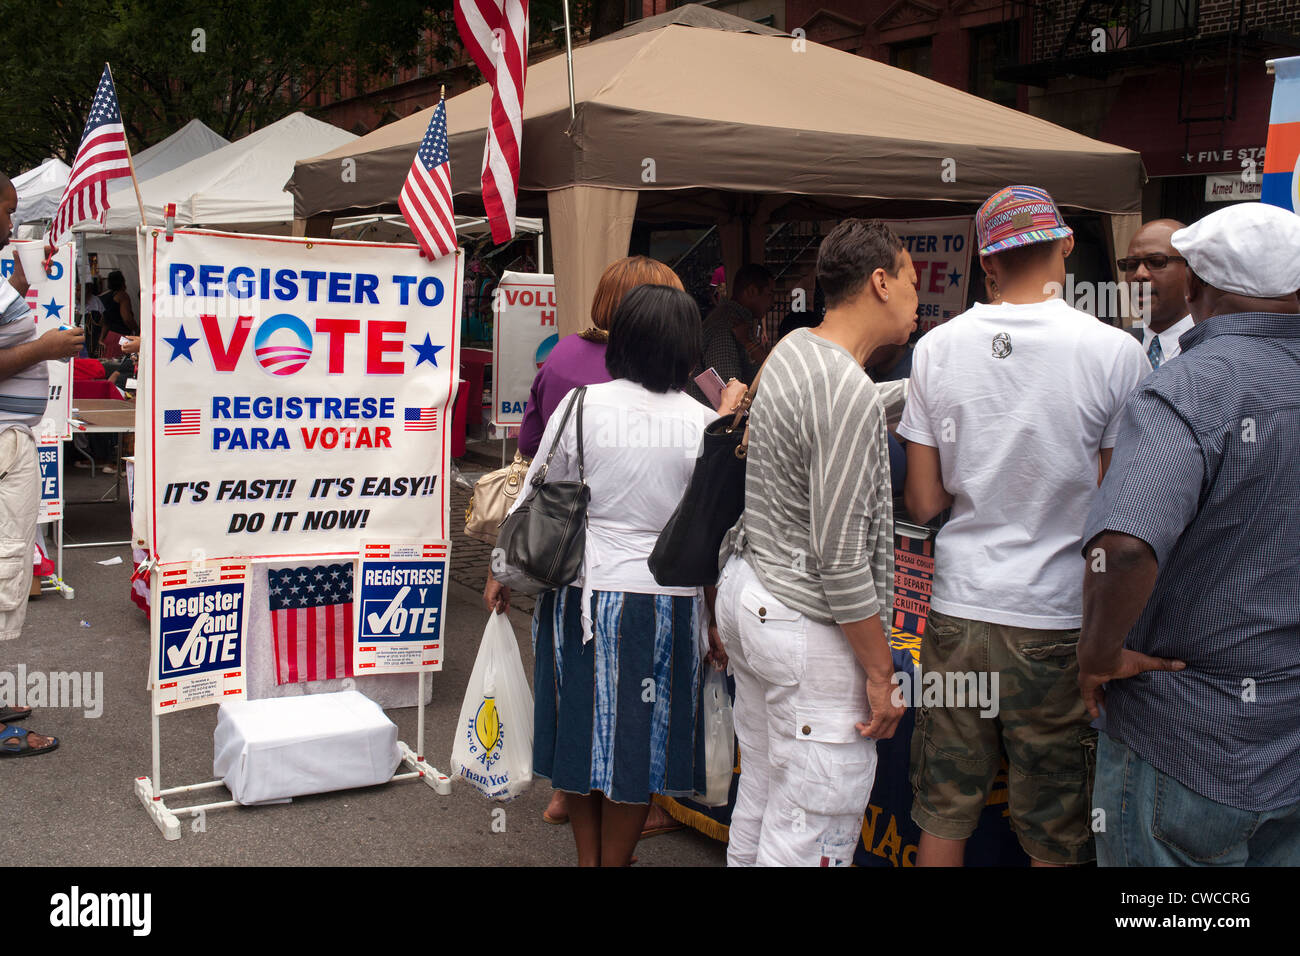 Voter registration booth during the Harlem Week street fair in Harlem in New York Stock Photo